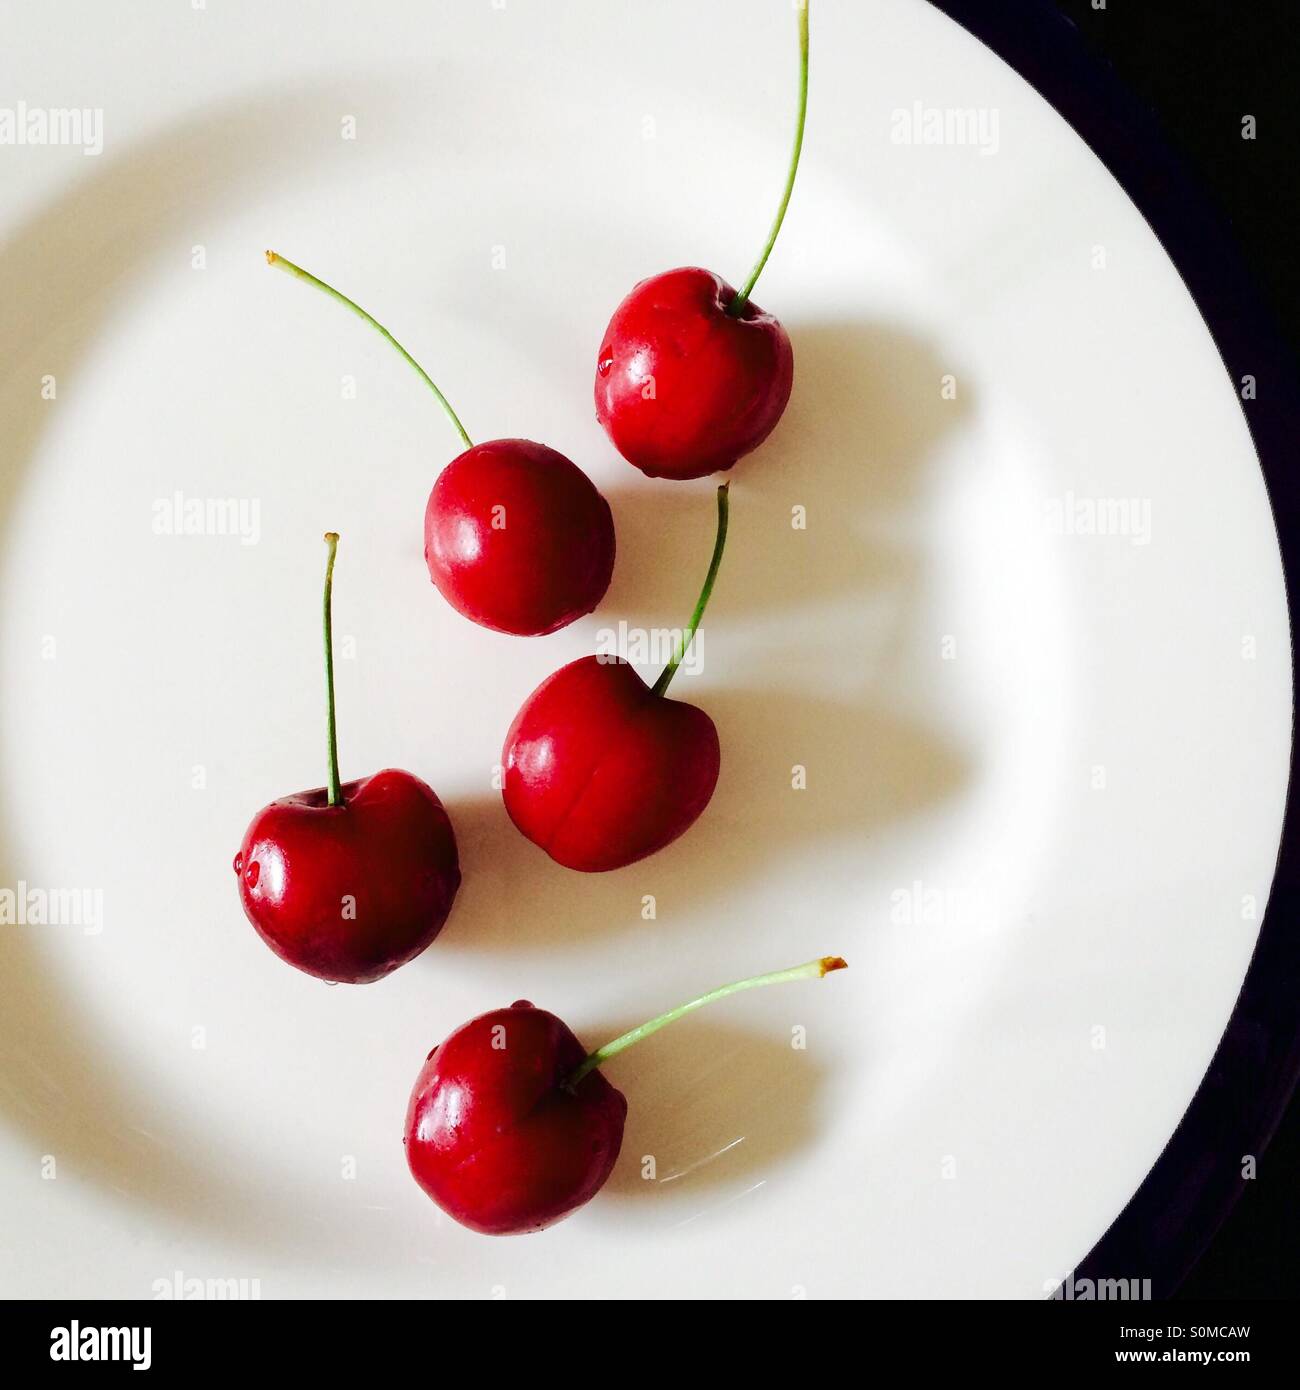 Five cherries on a white plate Stock Photo - Alamy